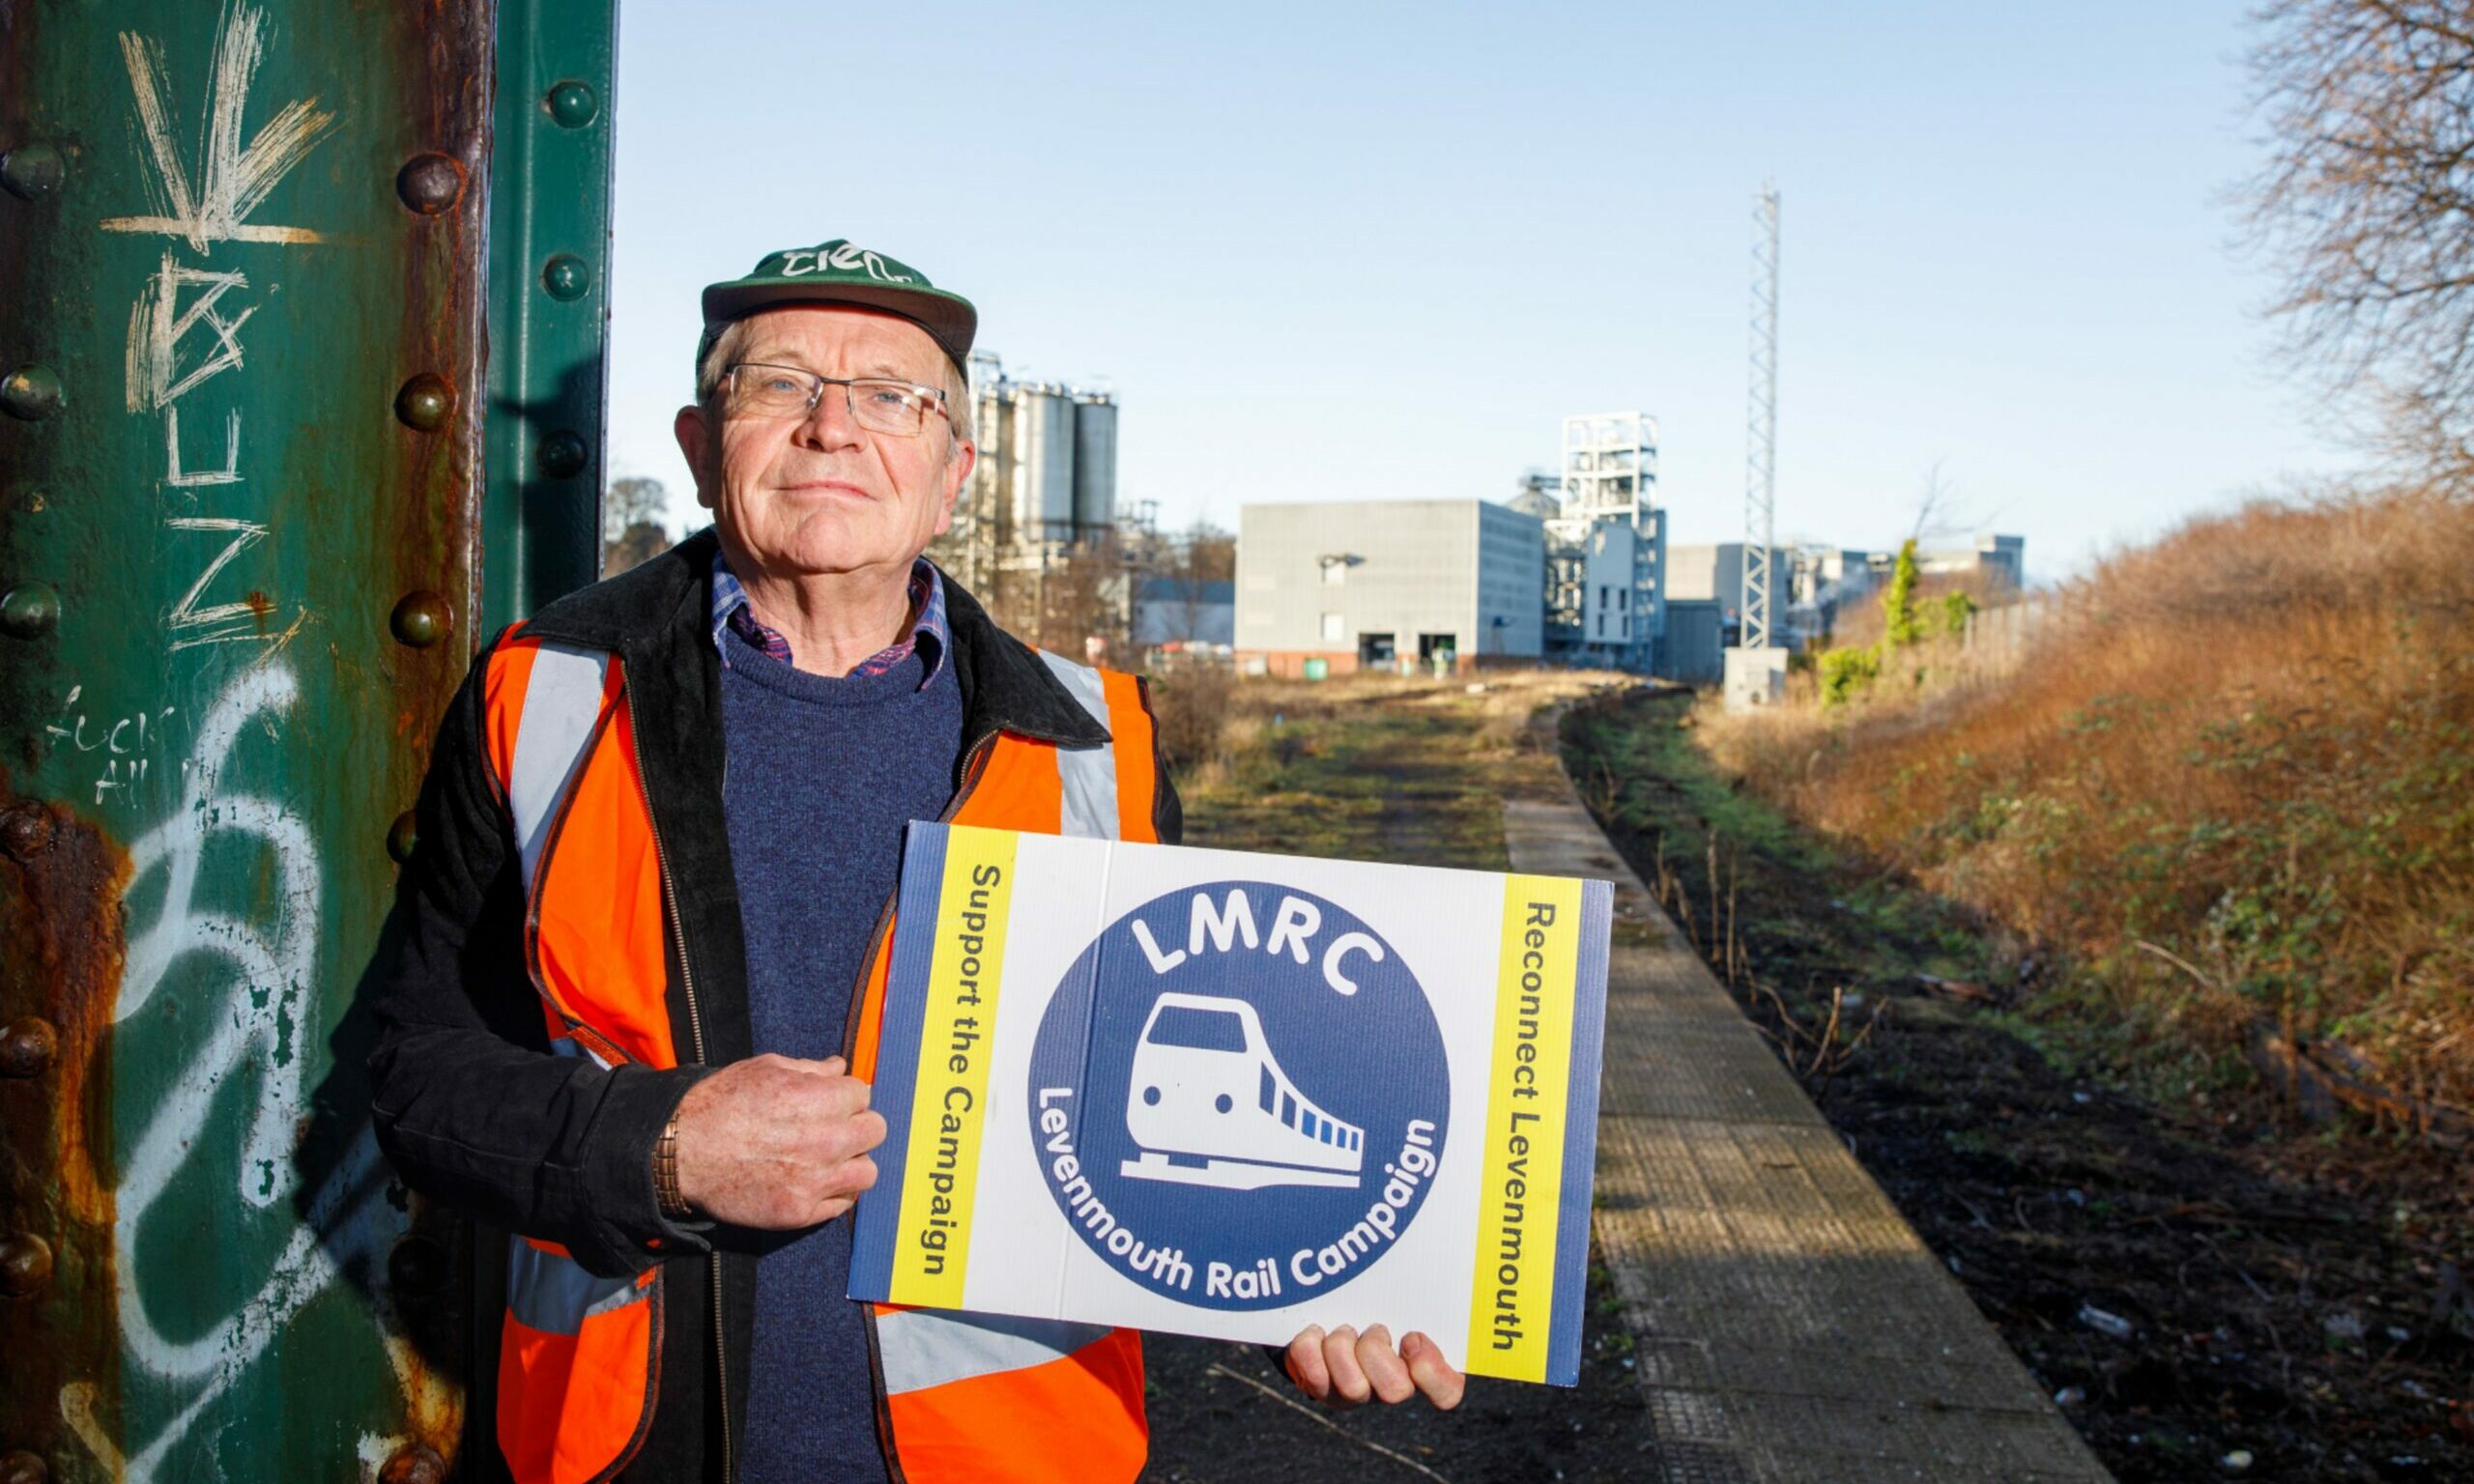 Allen Armstrong, chair of Levenmouth Rail Campaign